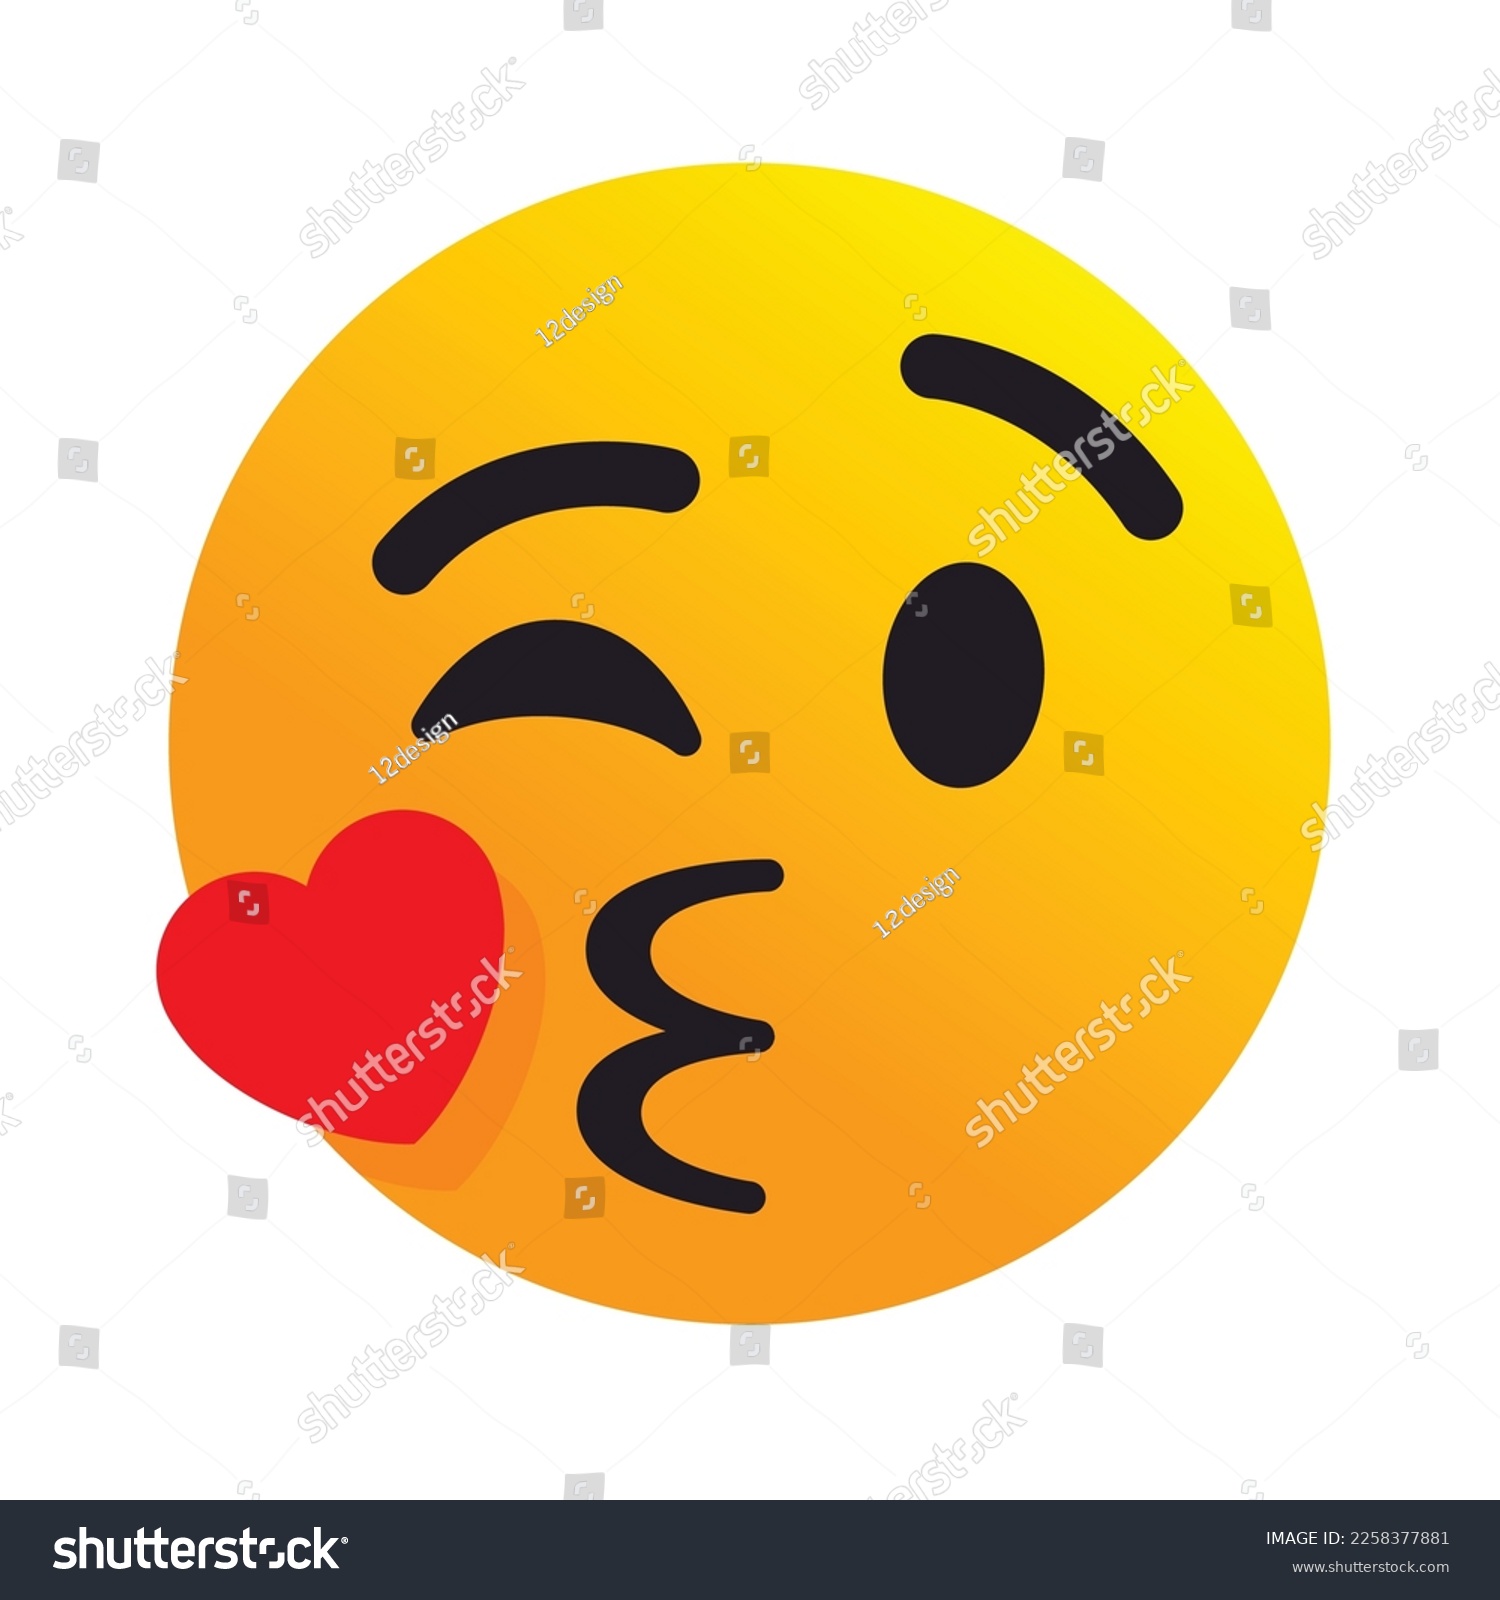 SVG of Face Blowing a Kiss vector icon. Isolated yellow face winking with puckered lips blowing a kiss, depicted as a small, red heart. Goodbye, good night, kiss sign sticker.  svg